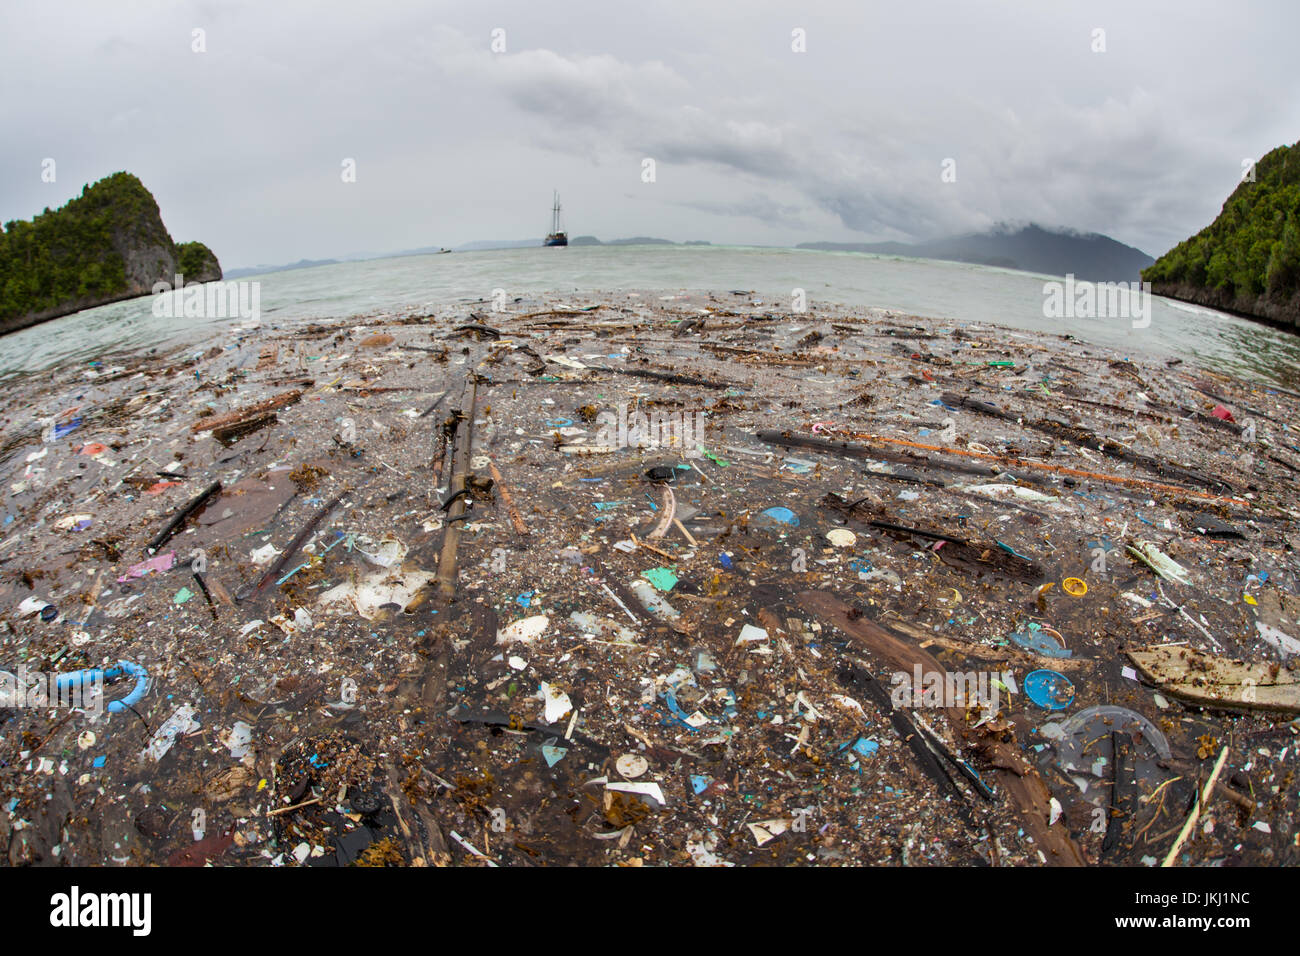 Discarded plastic washes up on a remote island in Raja Ampat, Indonesia. Plastic is an ever-growing environmental problem as it enters into food webs. Stock Photo